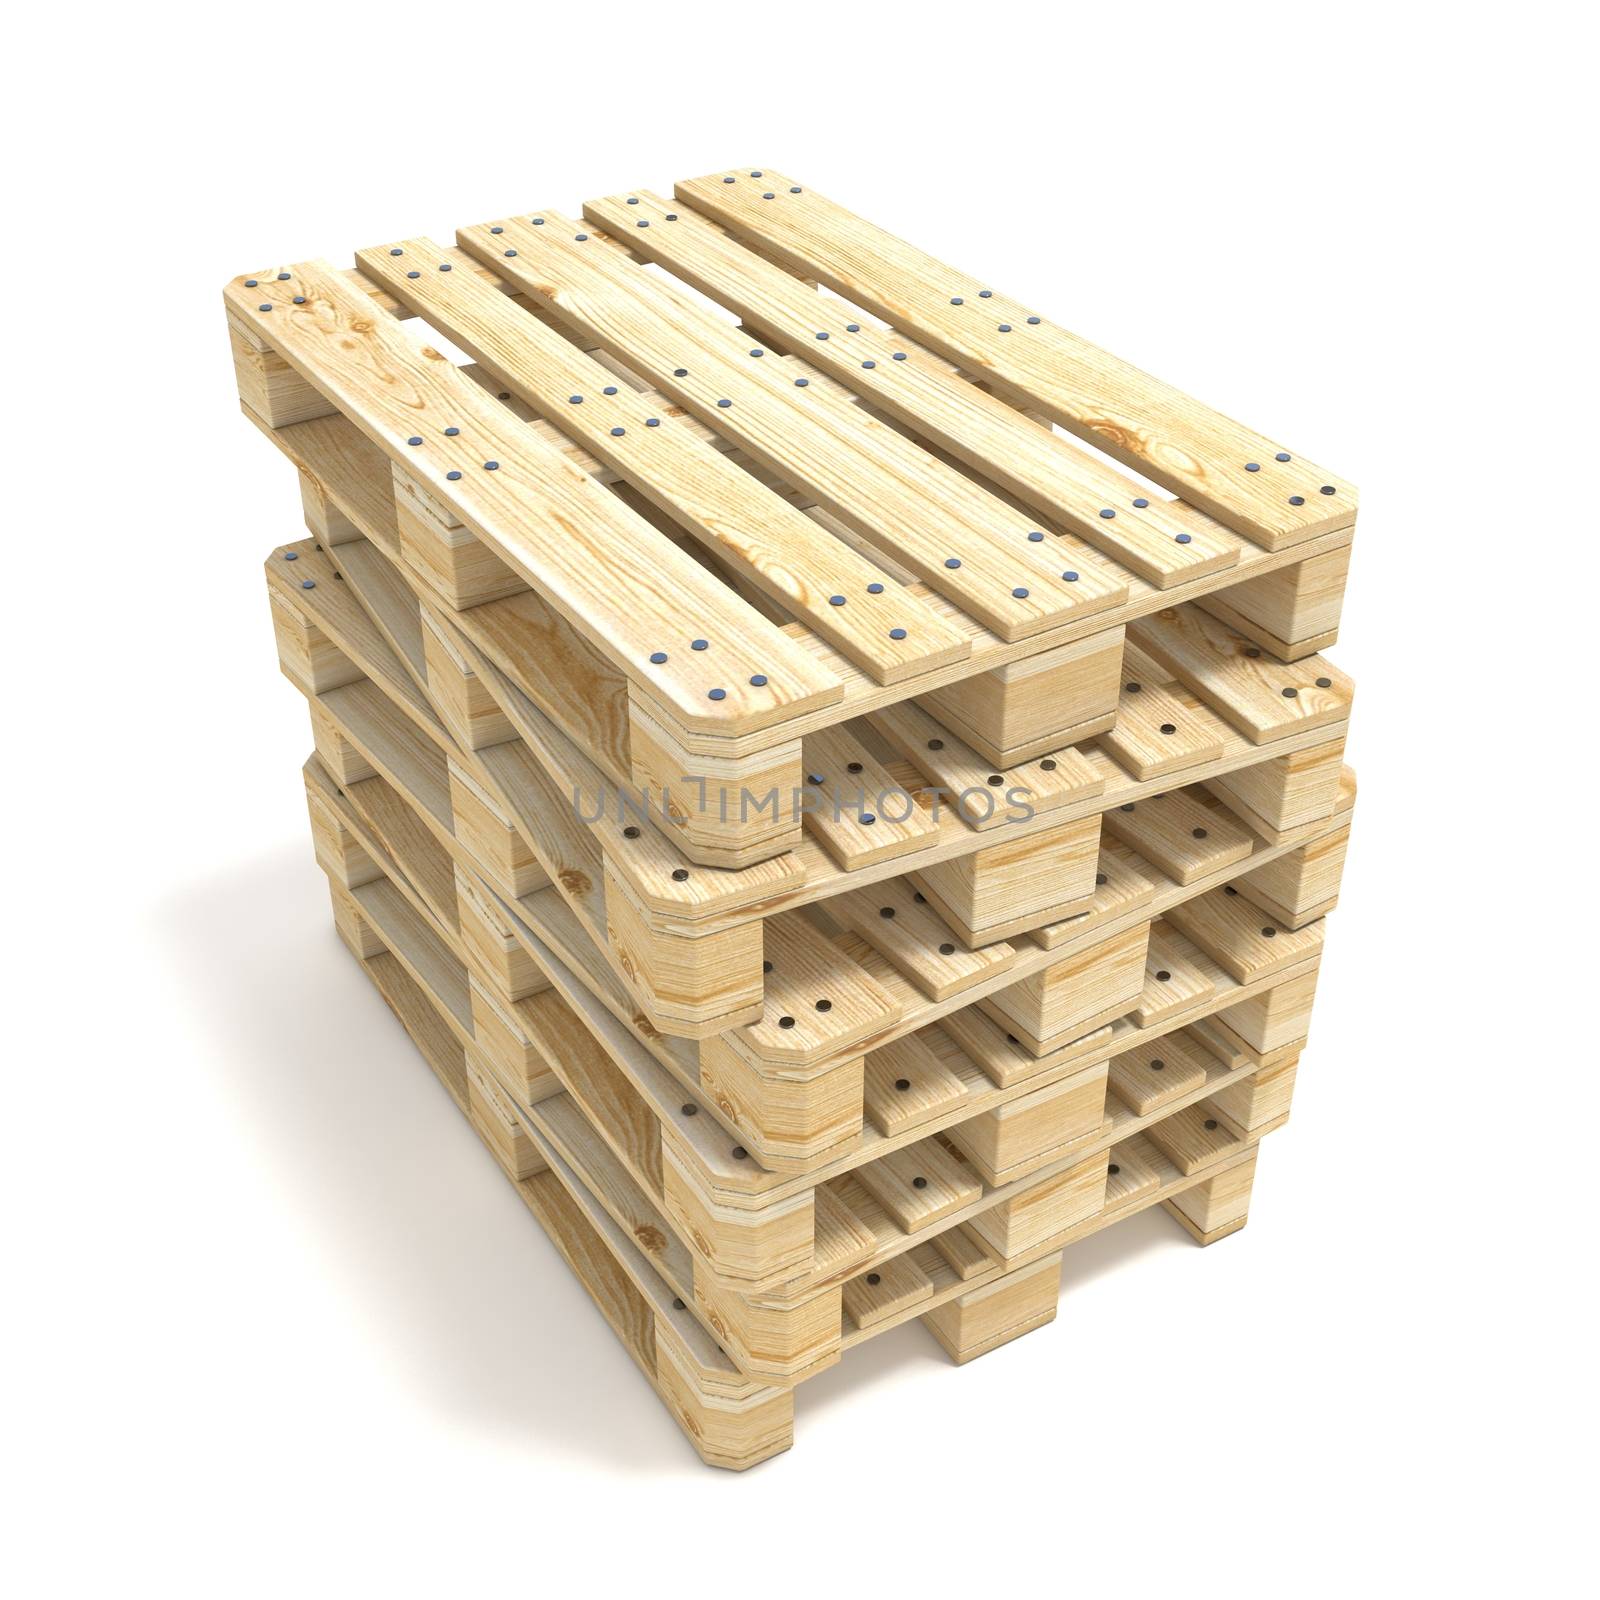 Wooden Euro pallets. 3D by djmilic